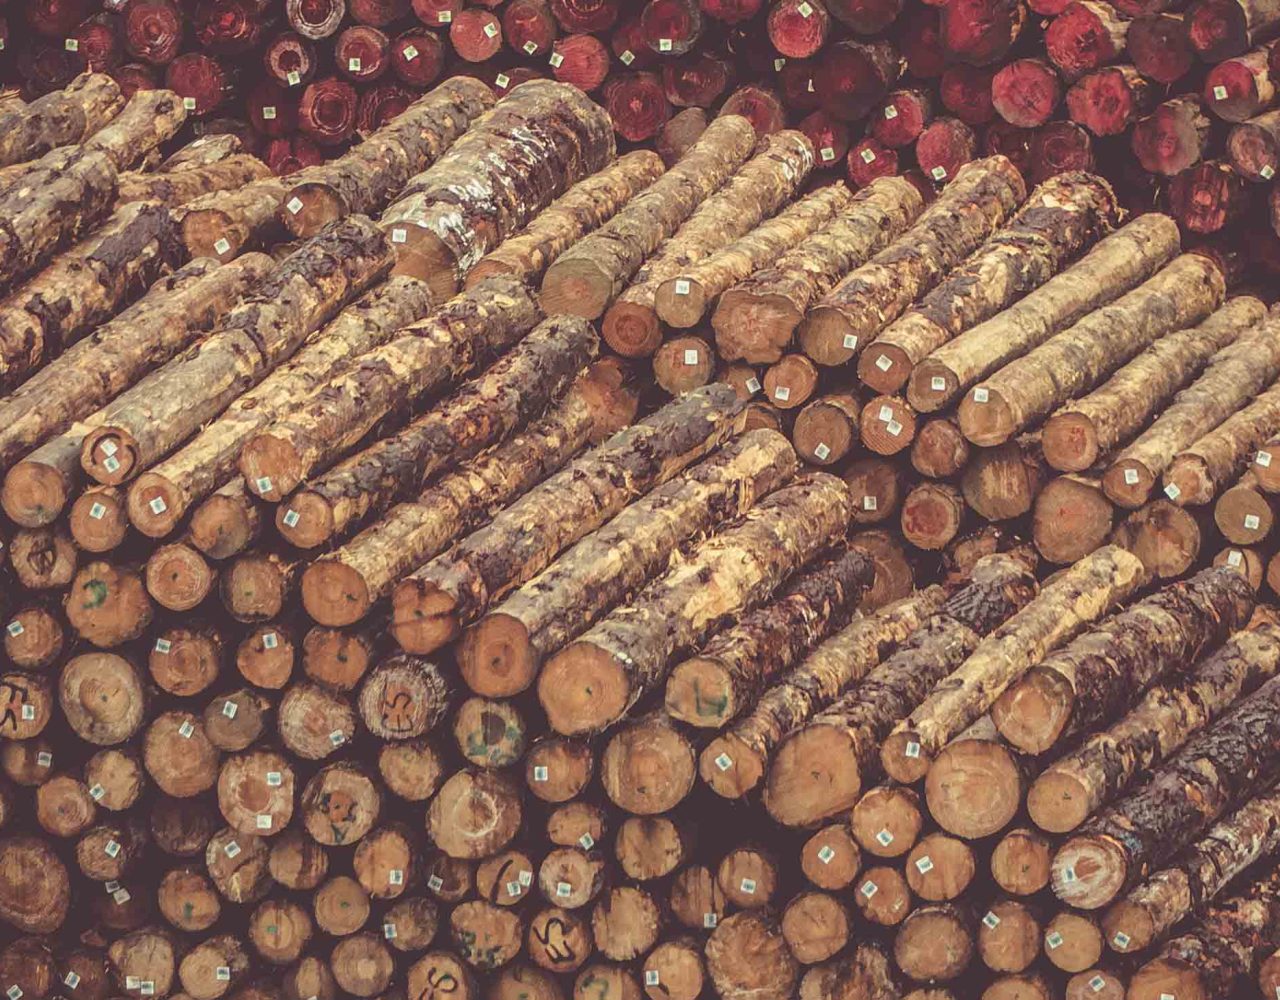 The Woody Biomass Blunder